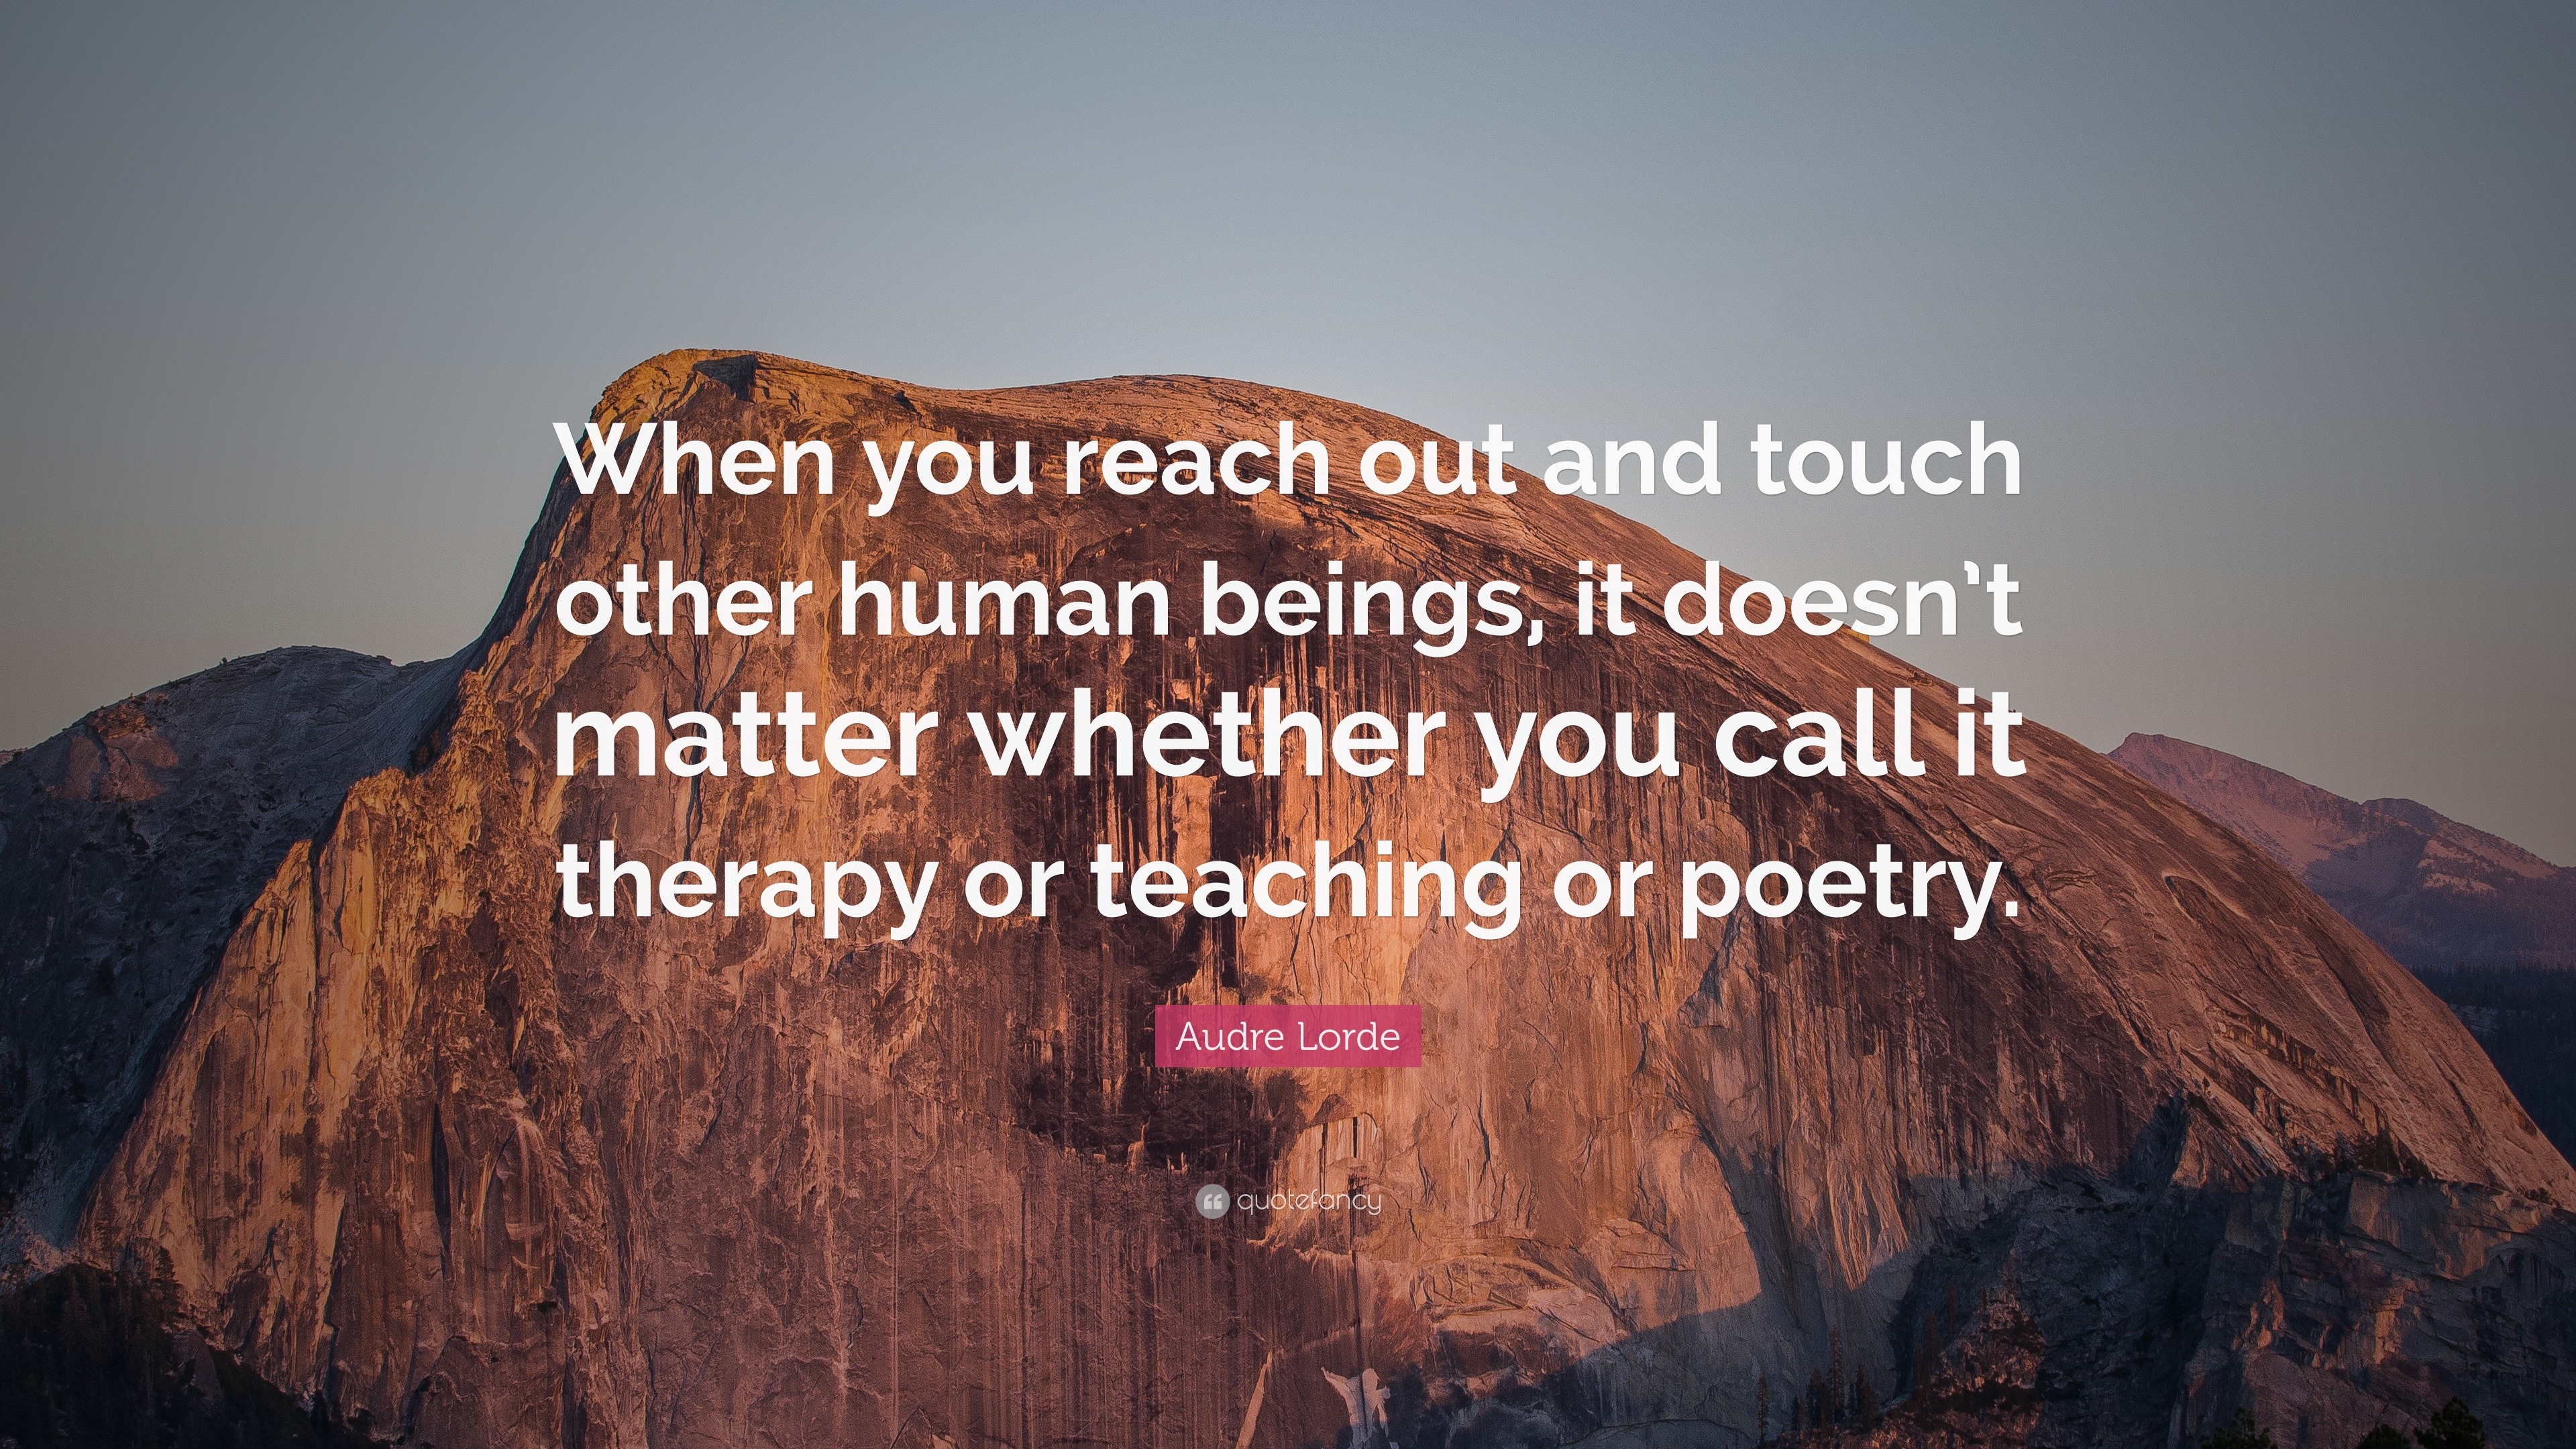 Audre Lorde Quote: “When you reach out and touch other human beings, it ...